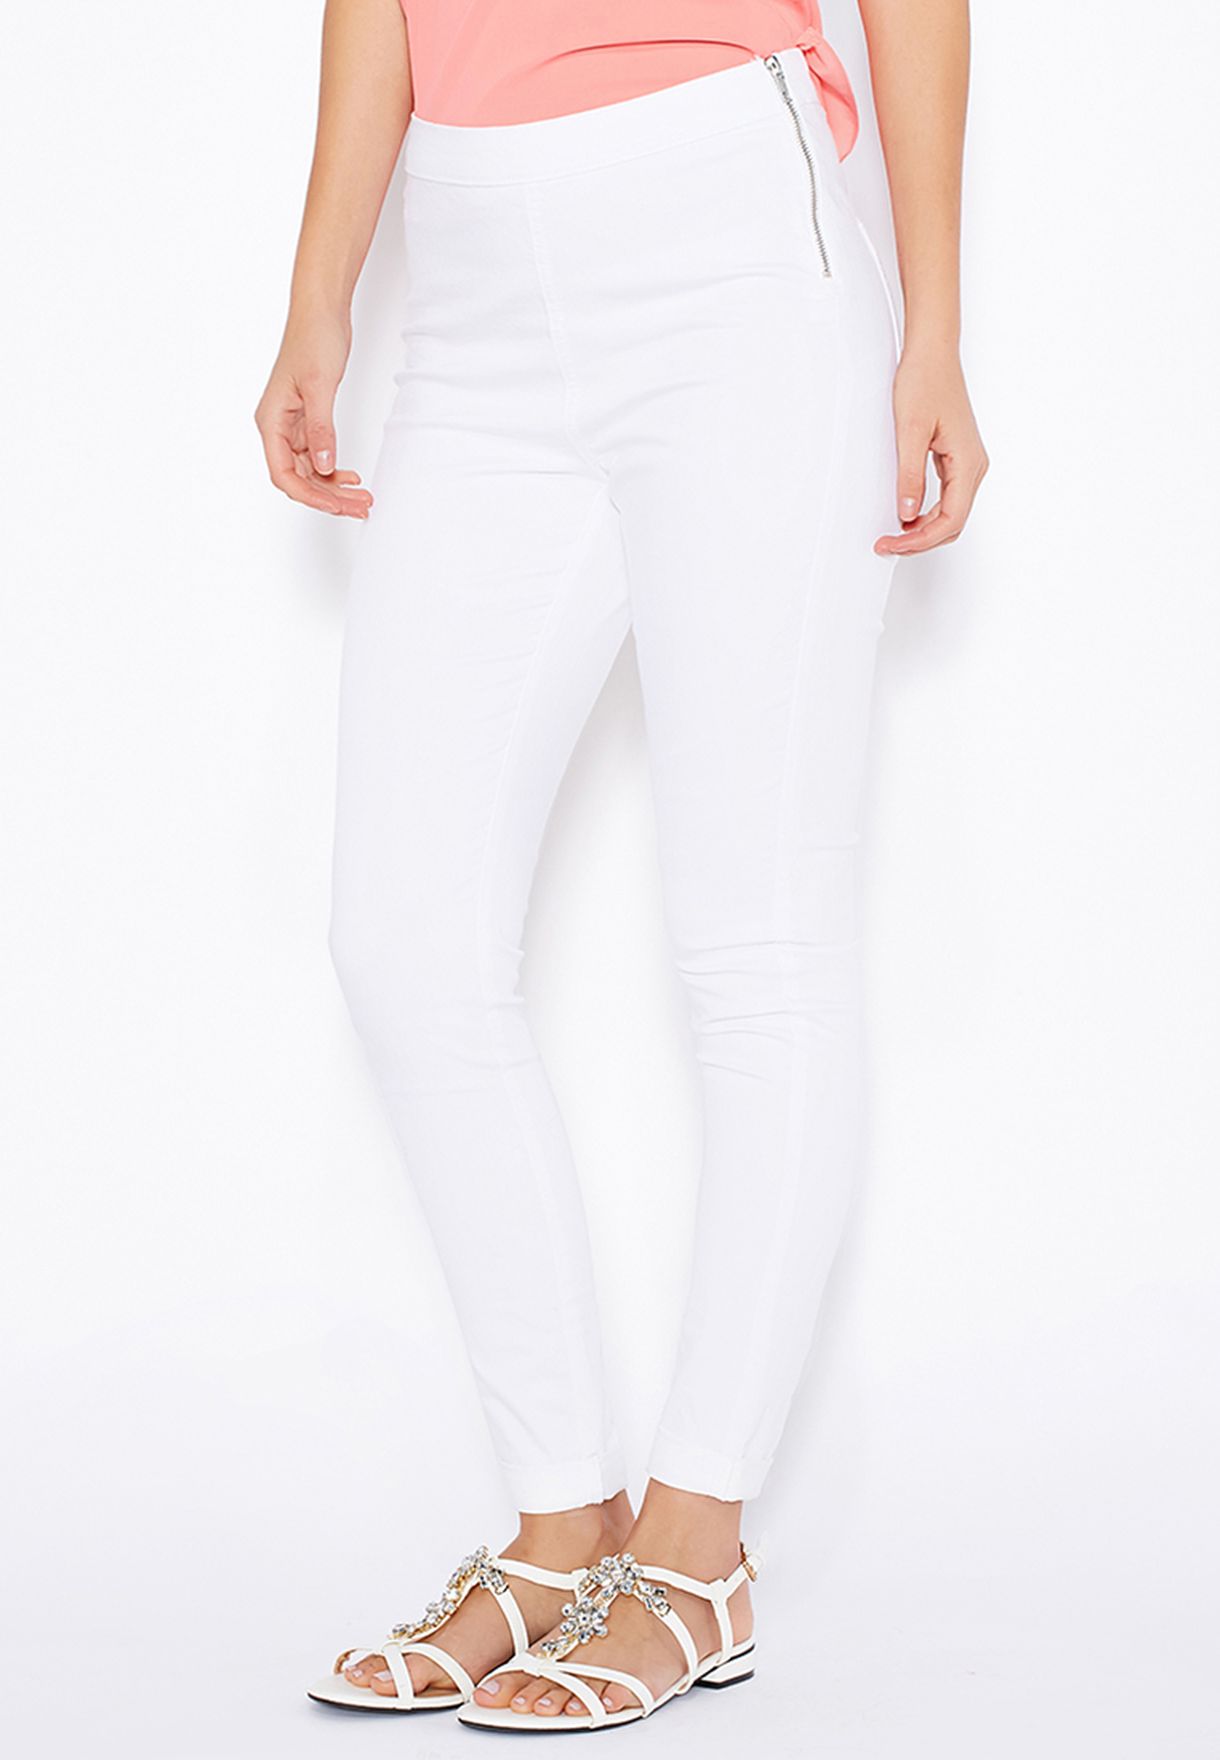 dorothy perkins high waisted jeggings